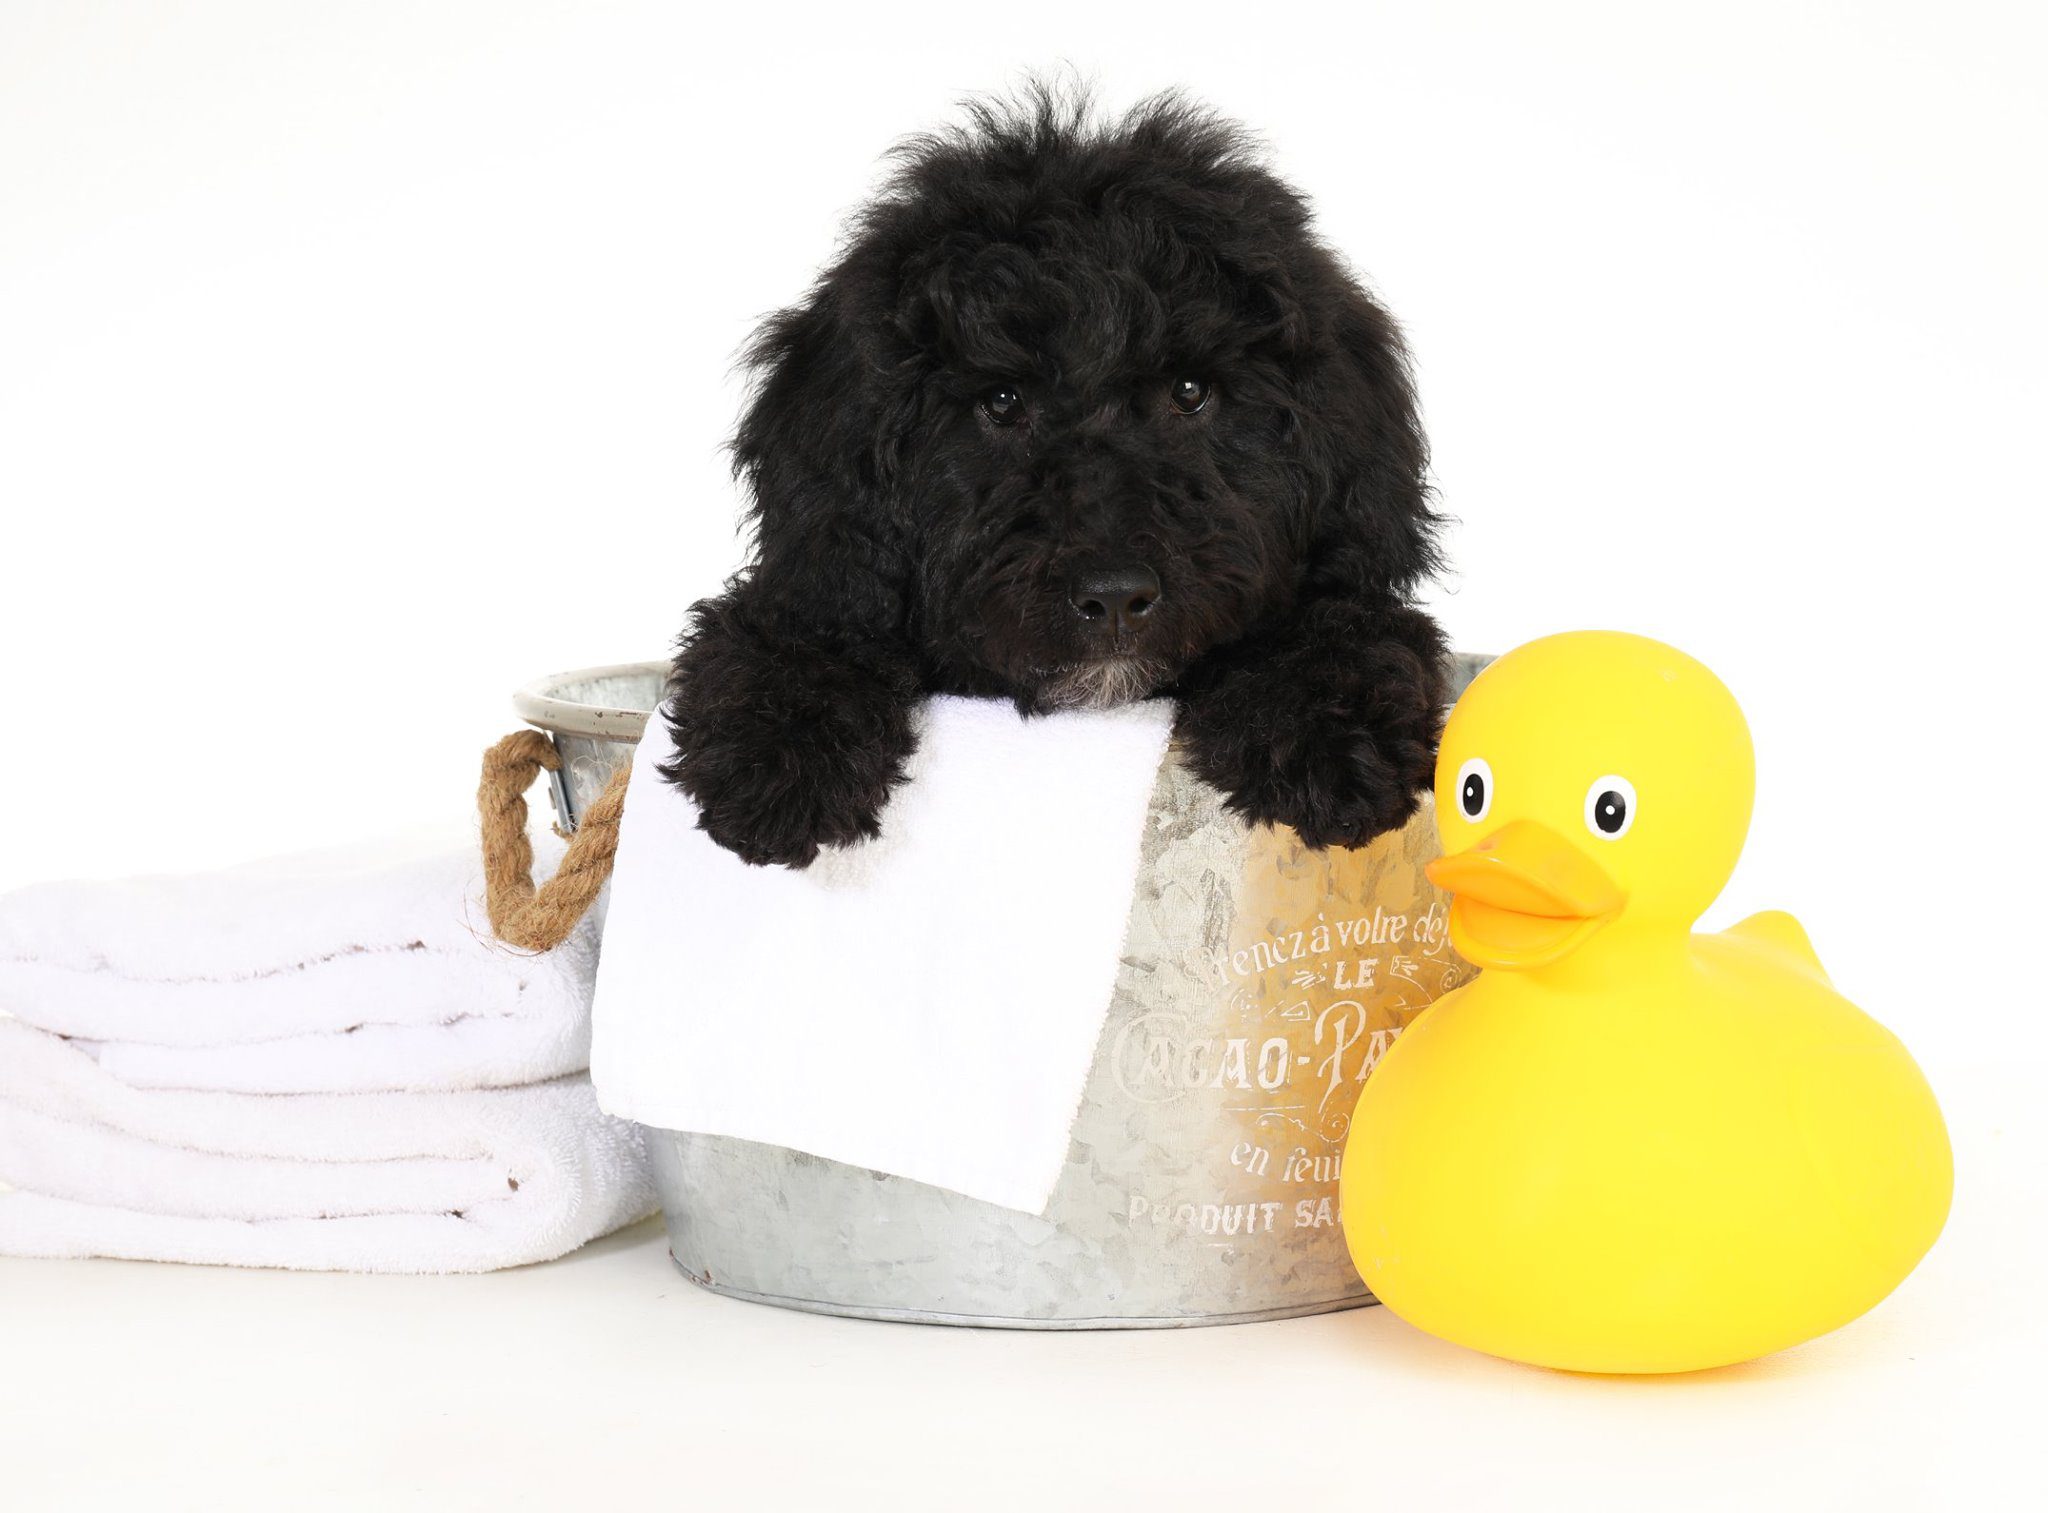 A black golden doodle seven week old puppy with a rubber duck